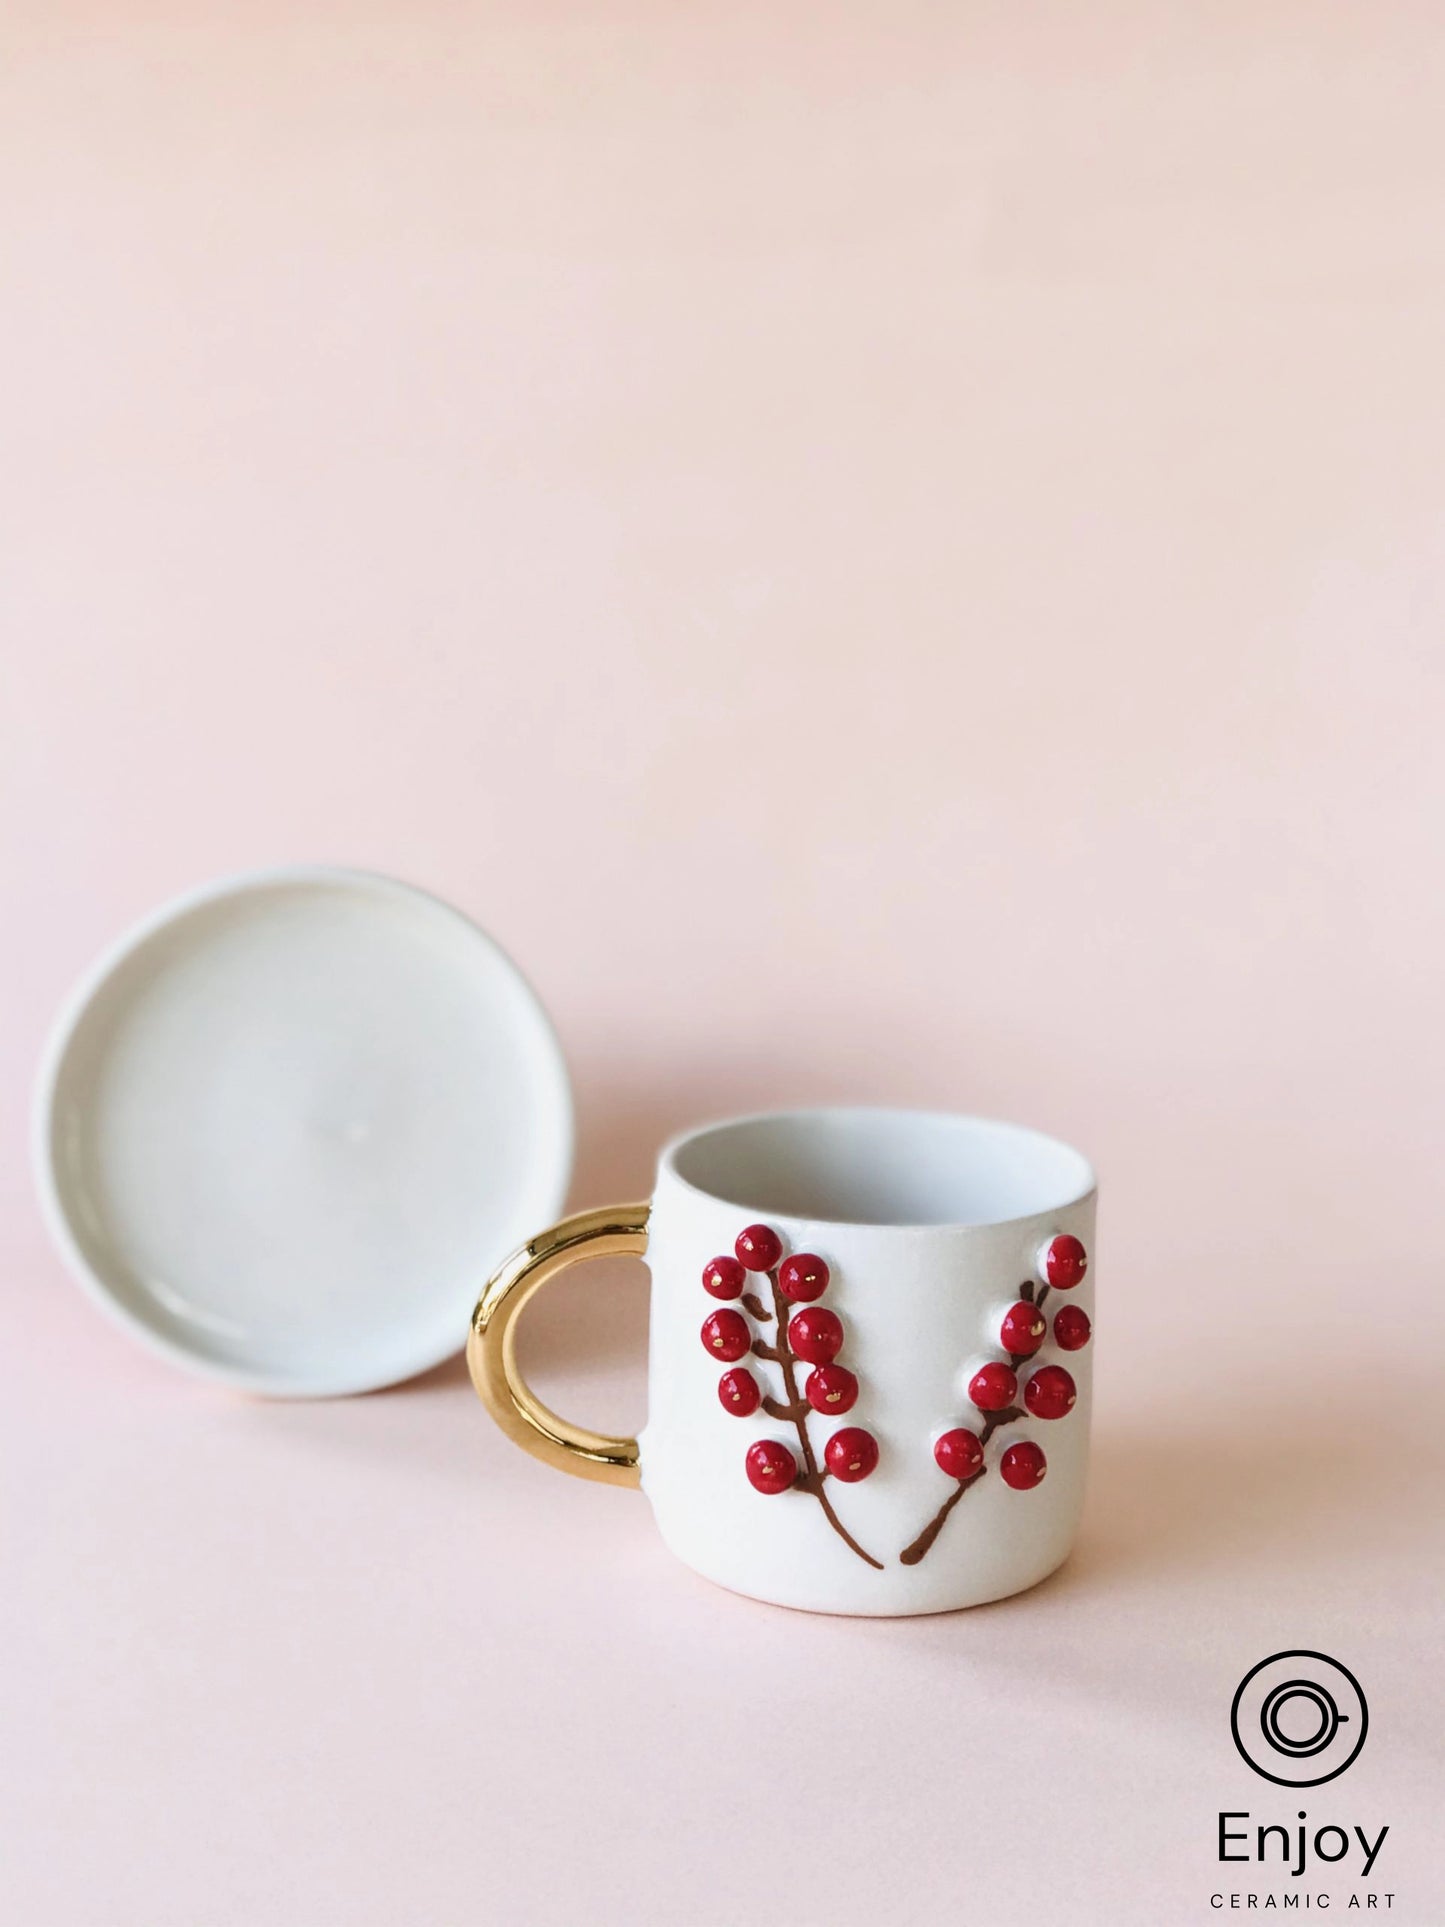 White ceramic espresso cup with a gold handle and raised red winterberry design, against a pale pink backdrop, by Enjoy Ceramic Art.